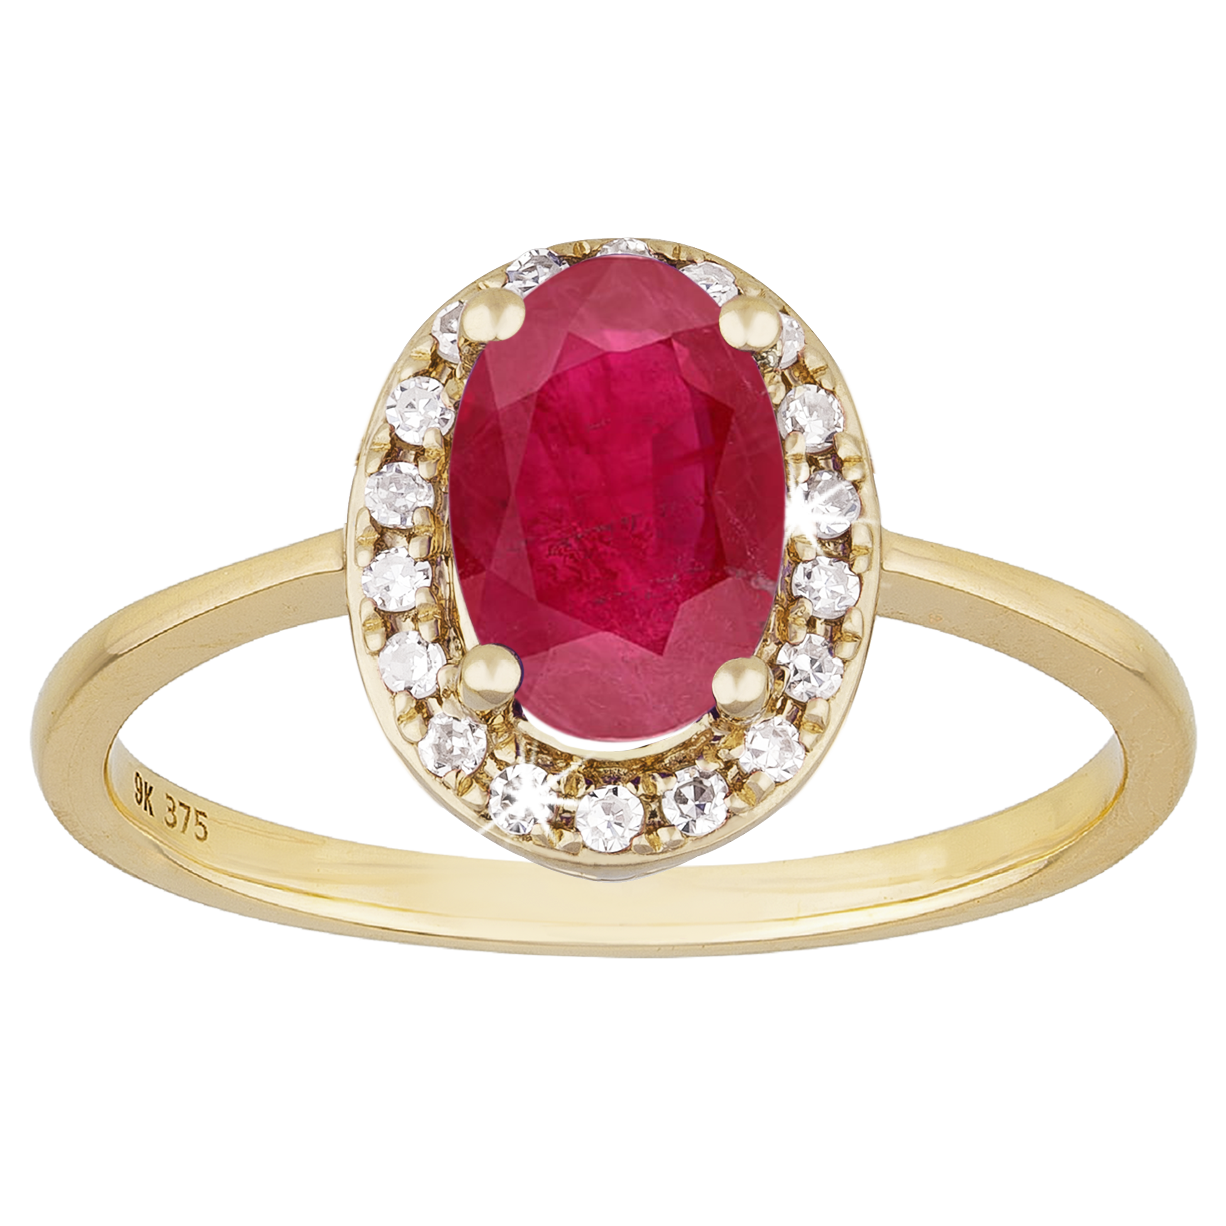 Oval 0.60ct Ruby set in an Oval Halo of Diamonds with a 9ct Yellow Gold band.